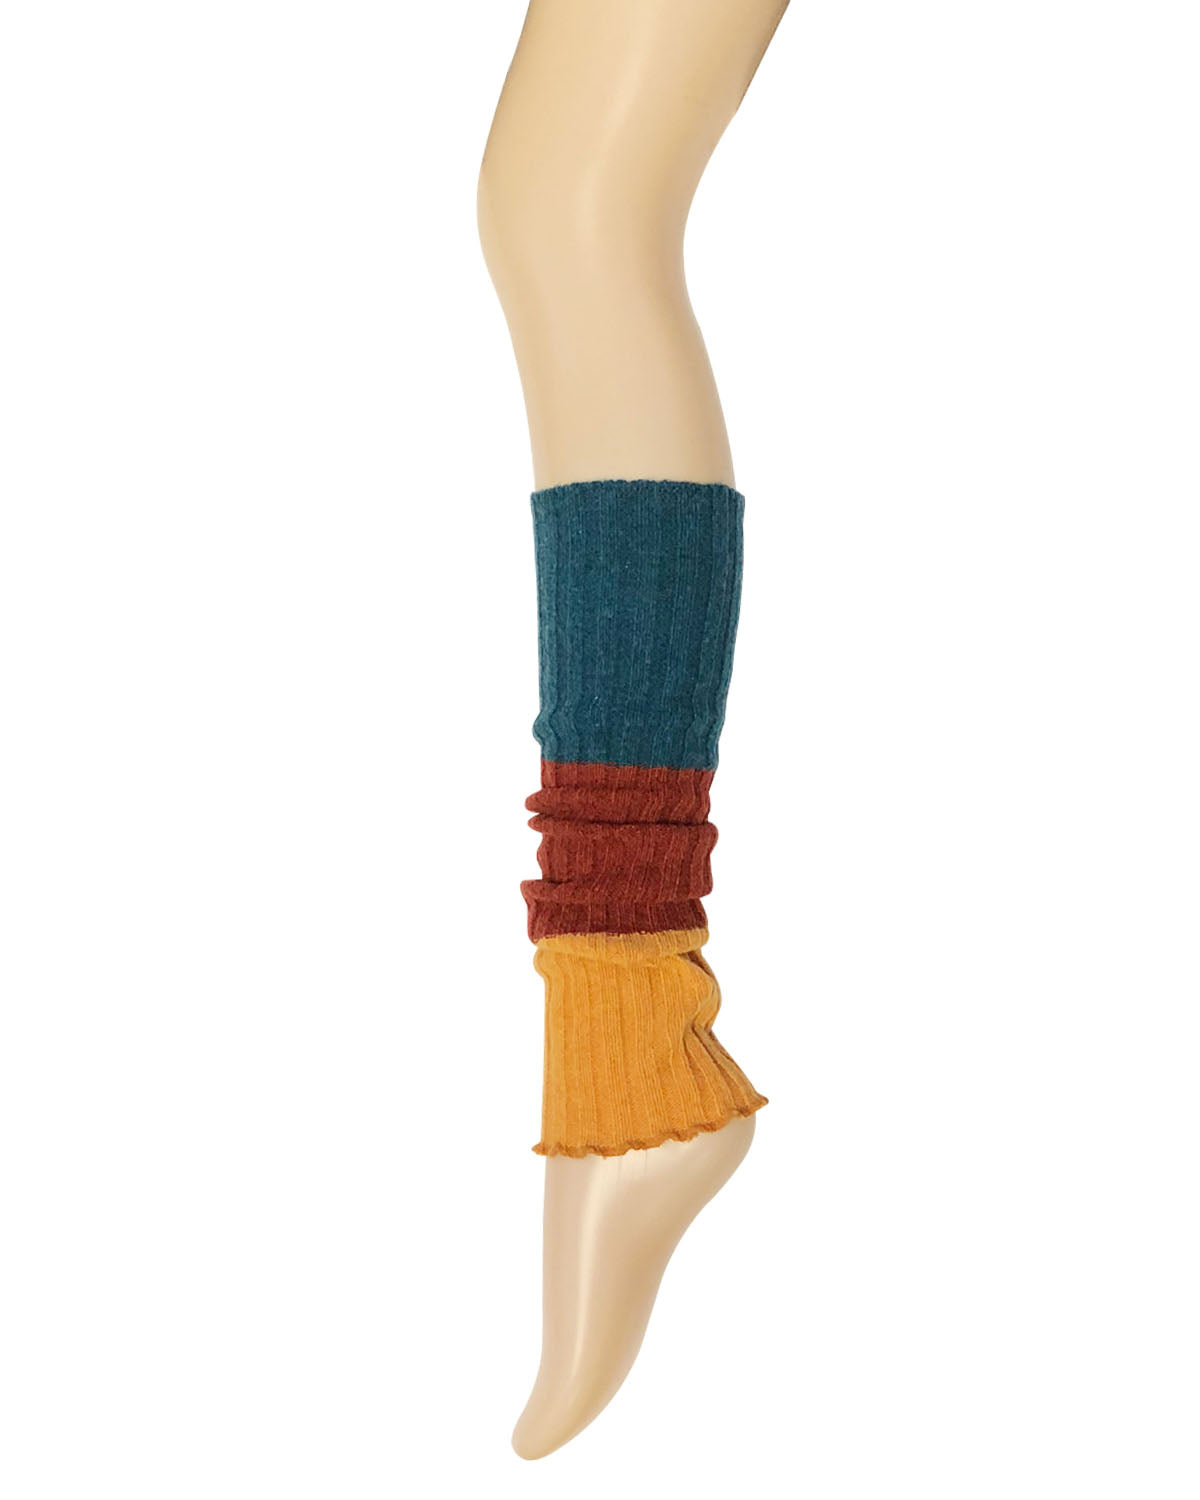 WrapablesÂ® Women's Tri-Colored Ribbed Leg Warmers